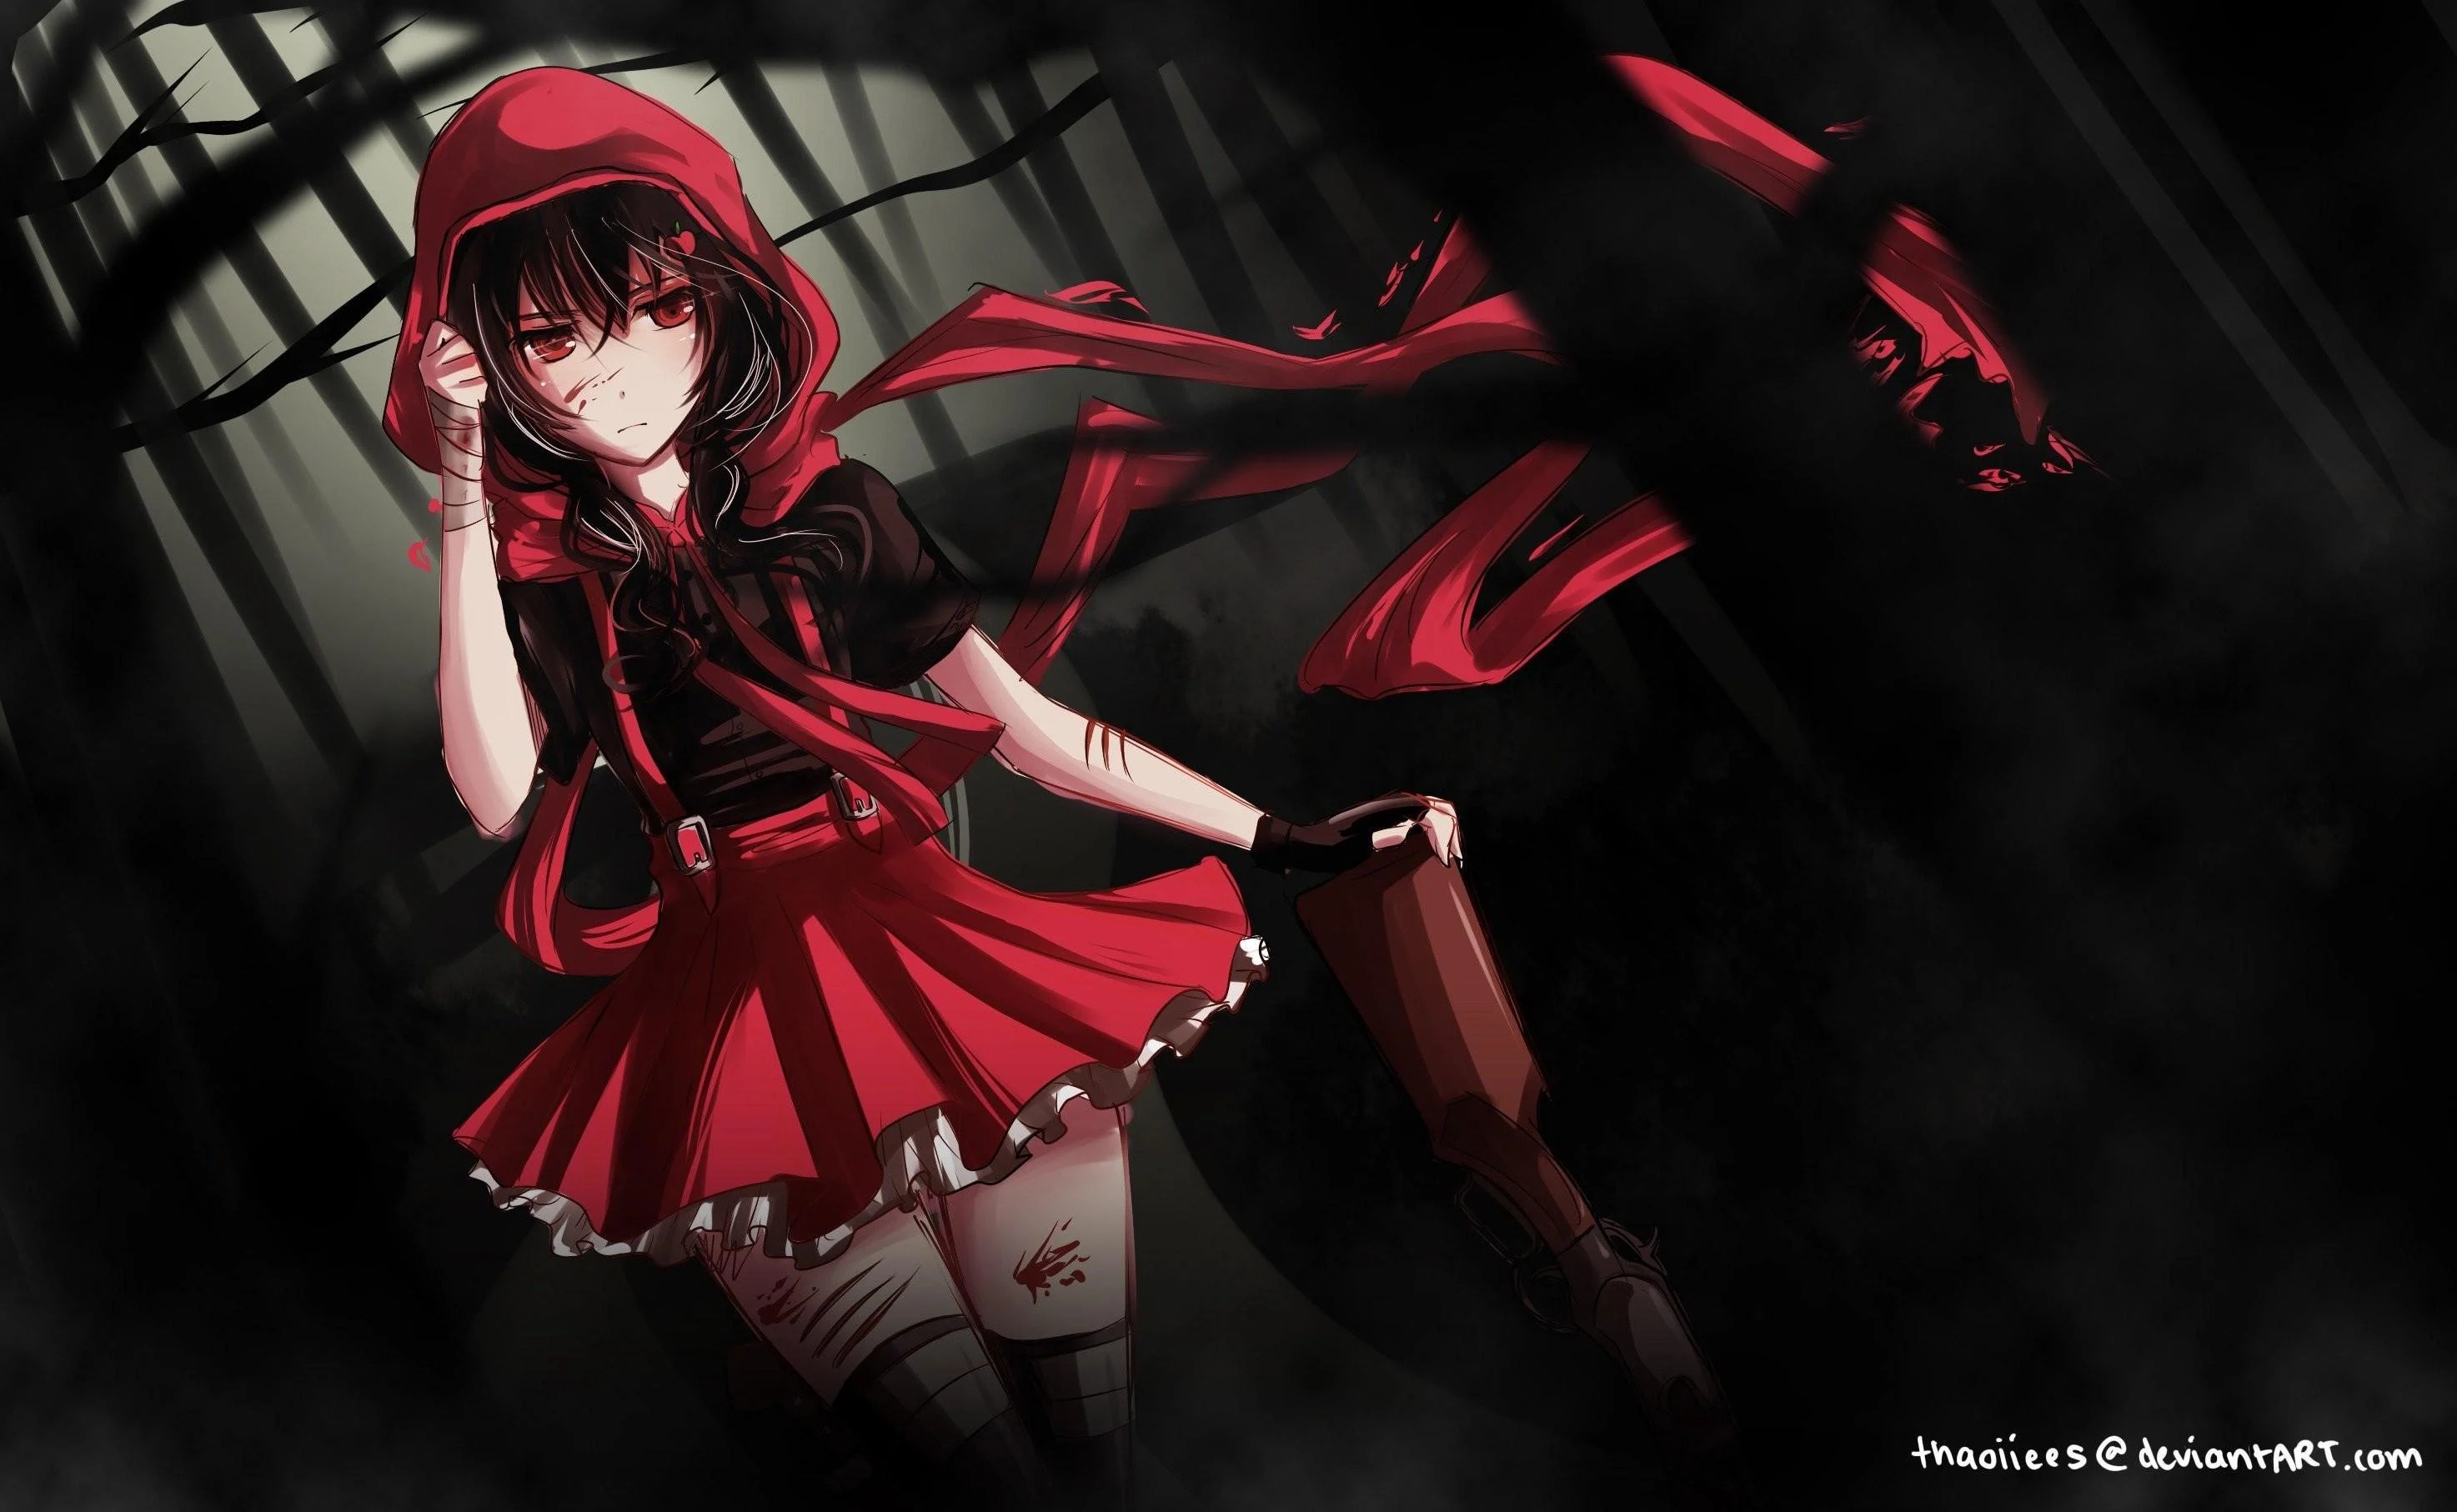 The Best 19 Aesthetic Darkness Black And Red Anime Wallpaper